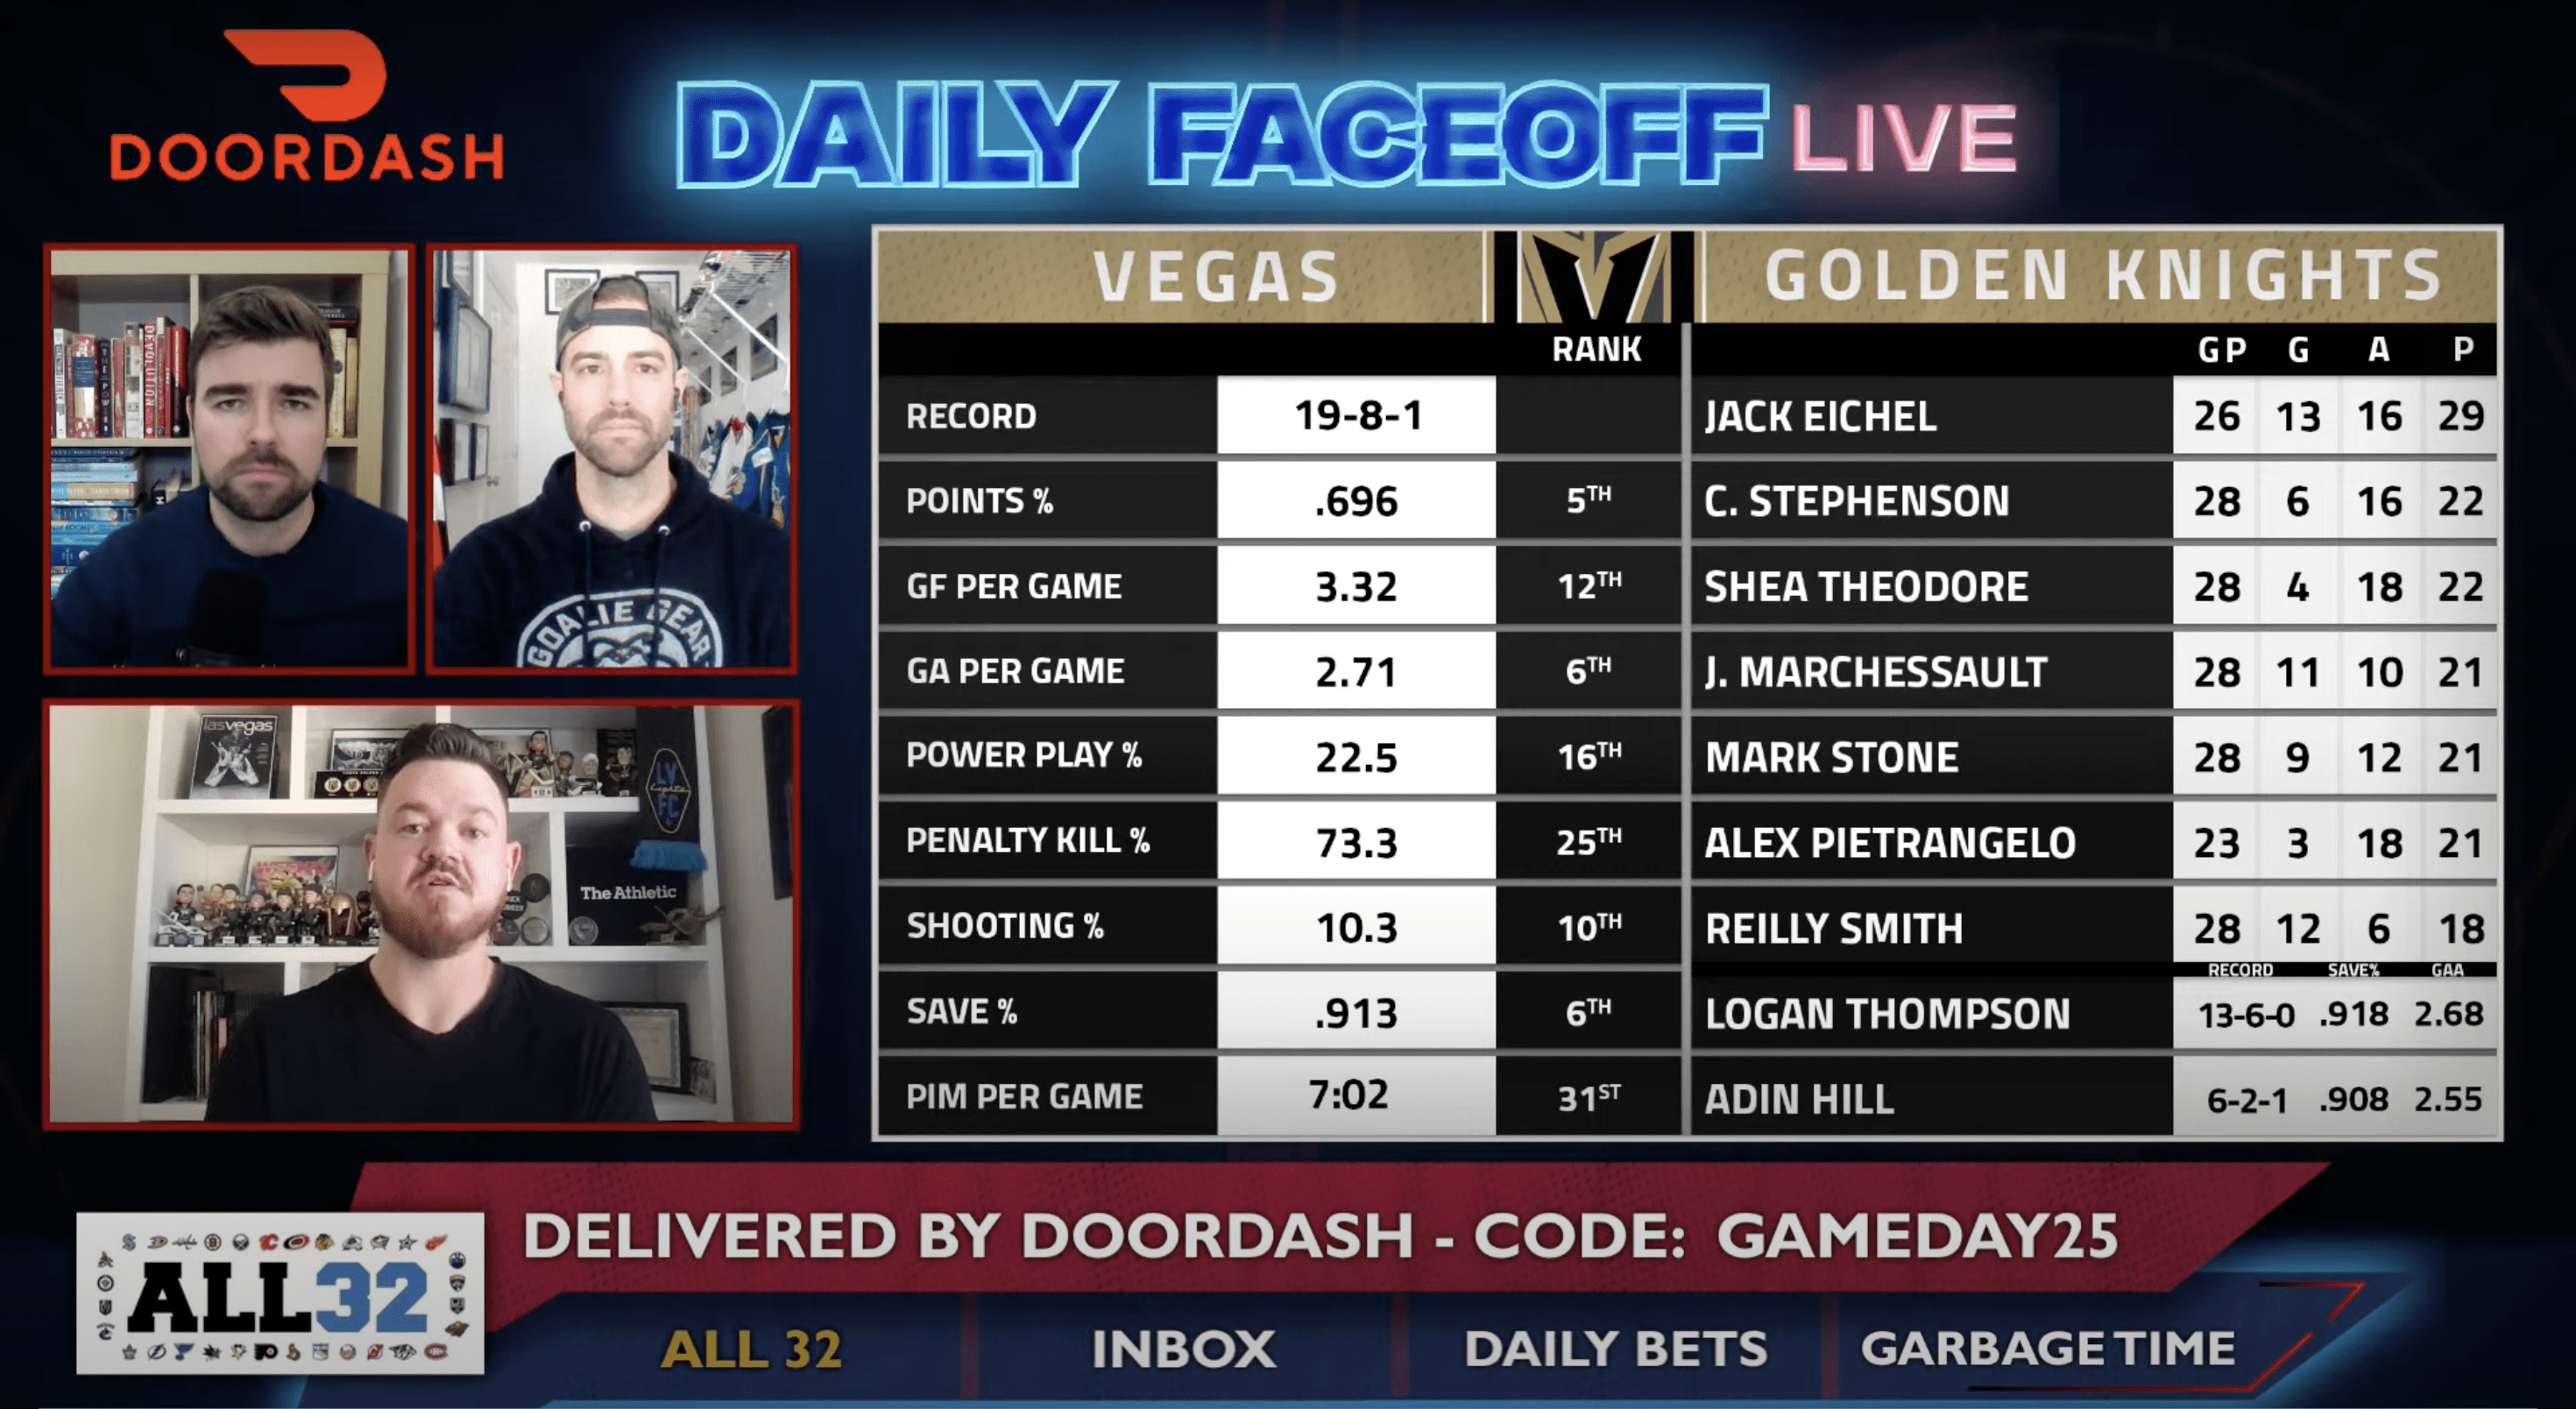 Daily Faceoff Live: The latest on Vegas Golden Knights stars Jack Eichel and Alex Pietrangelo